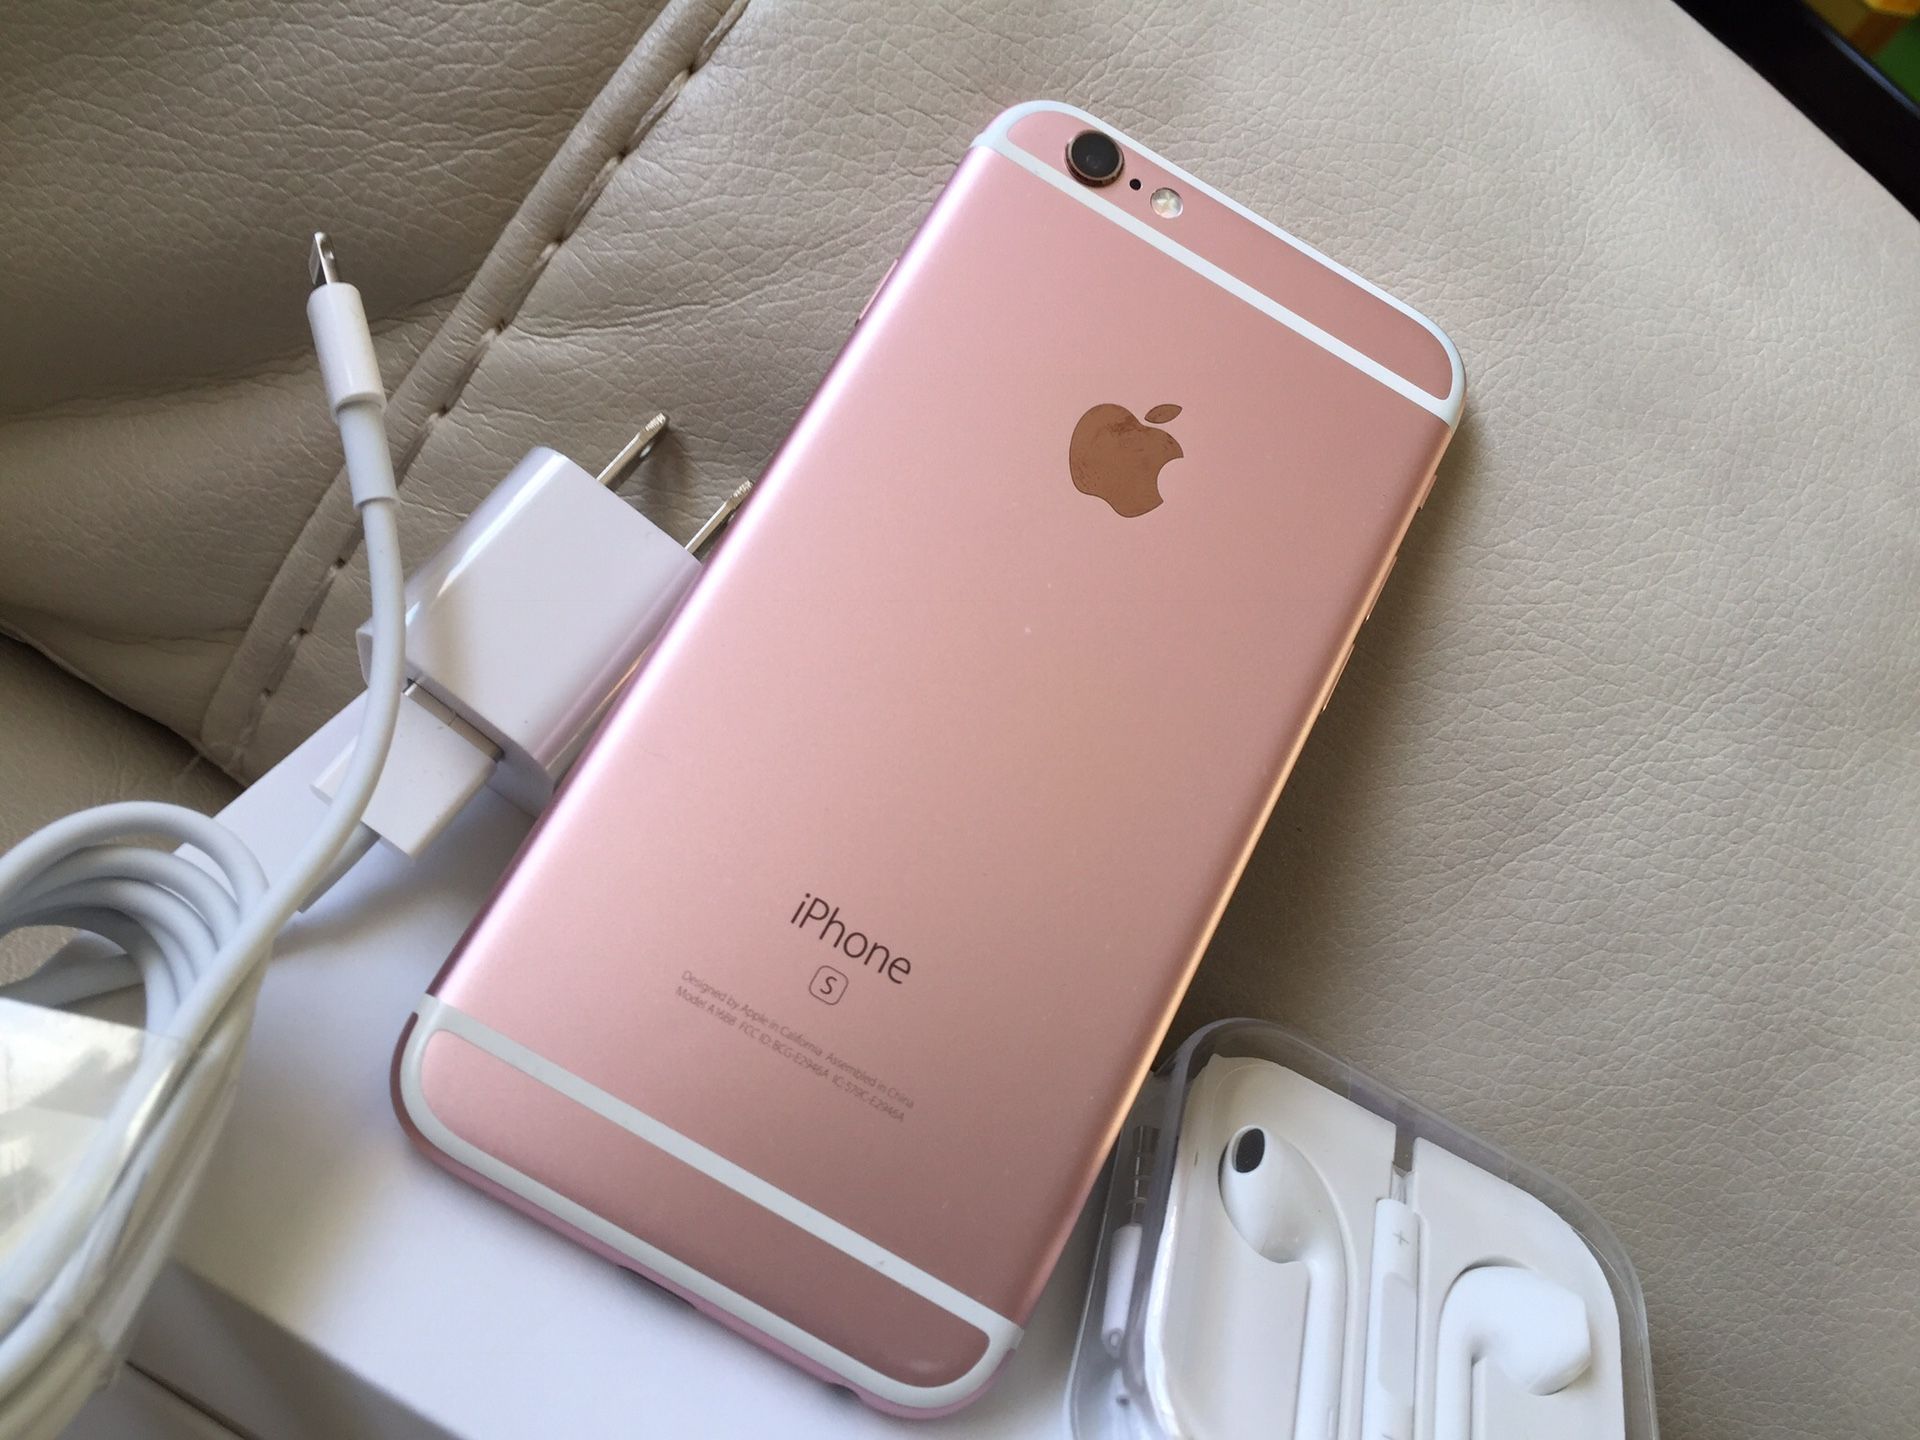 iPhone 6s Rose Gold,16 GB, excellent condition factory unlocked